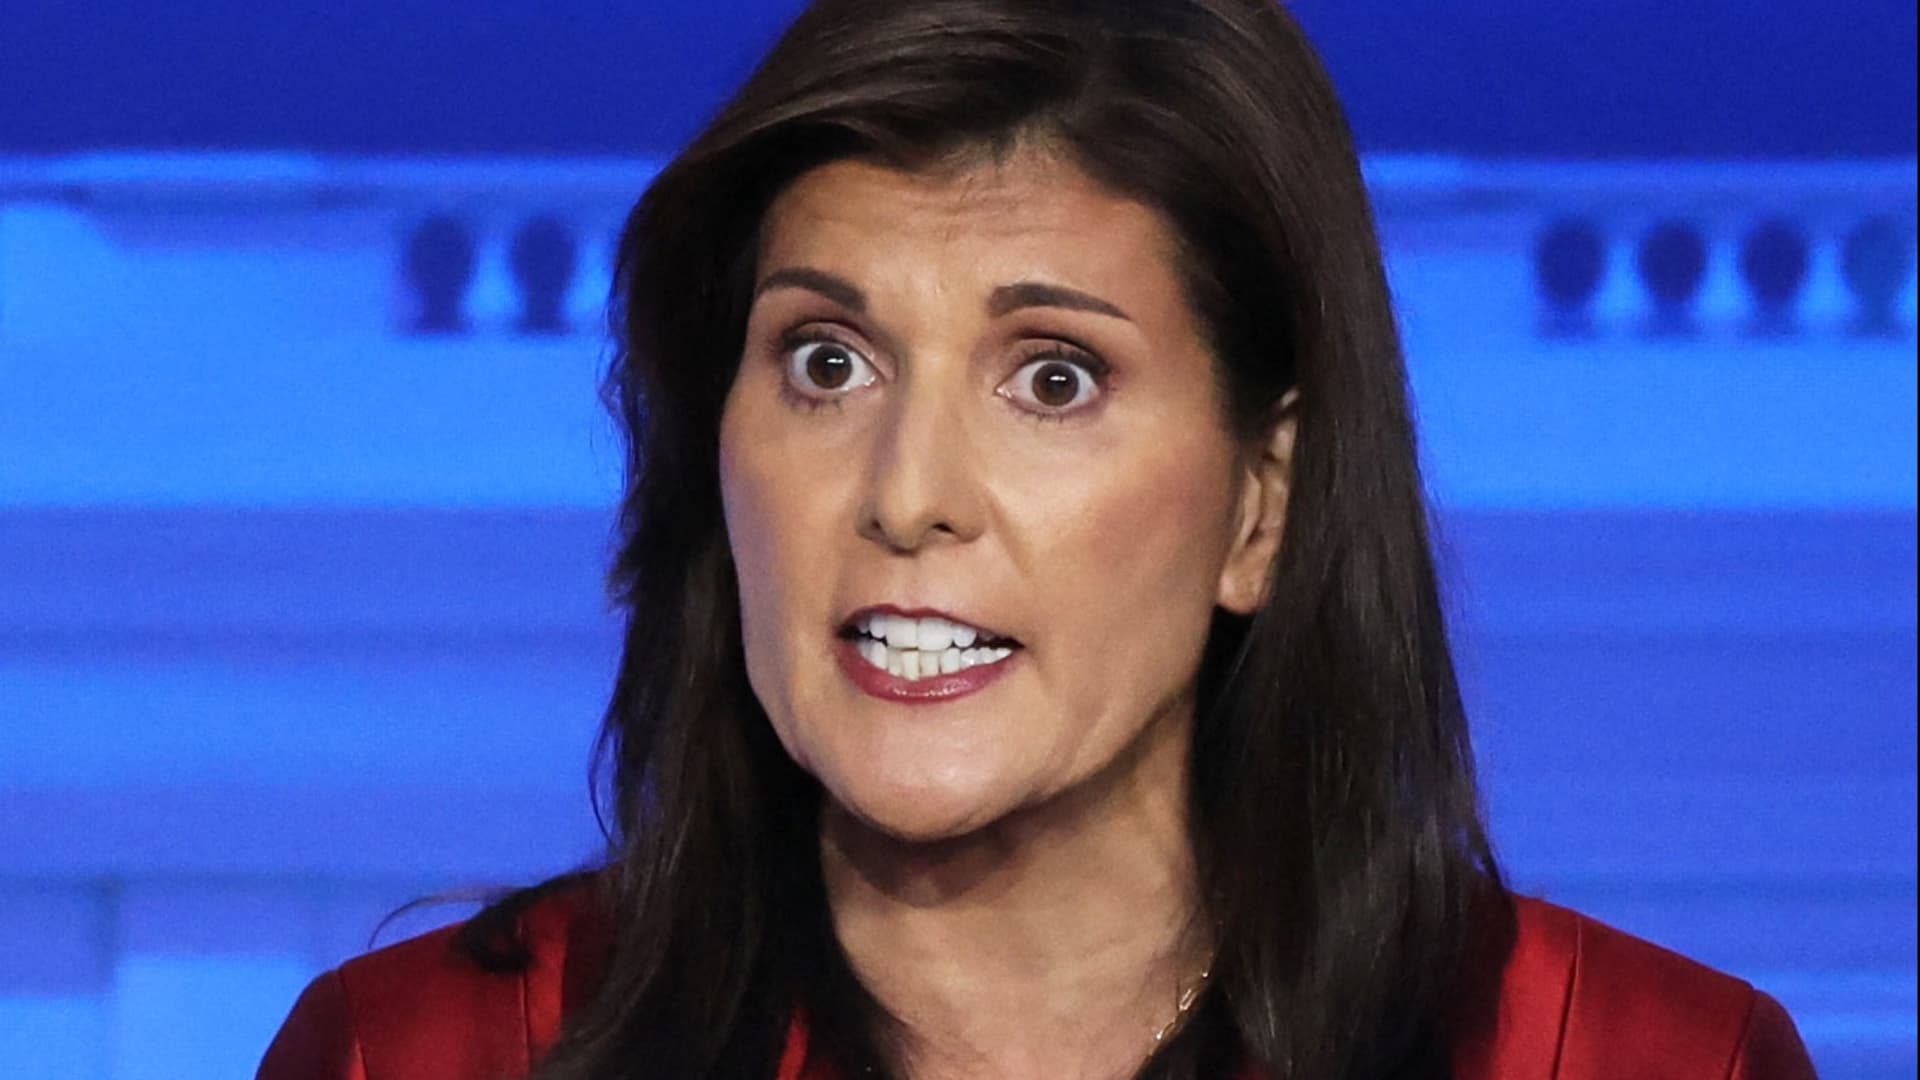 Former South Carolina Governor Nikki Haley speaks during the second Republican candidates' debate of the 2024 U.S. presidential campaign at the Ronald Reagan Presidential Library in Simi Valley, California, September 27, 2023.